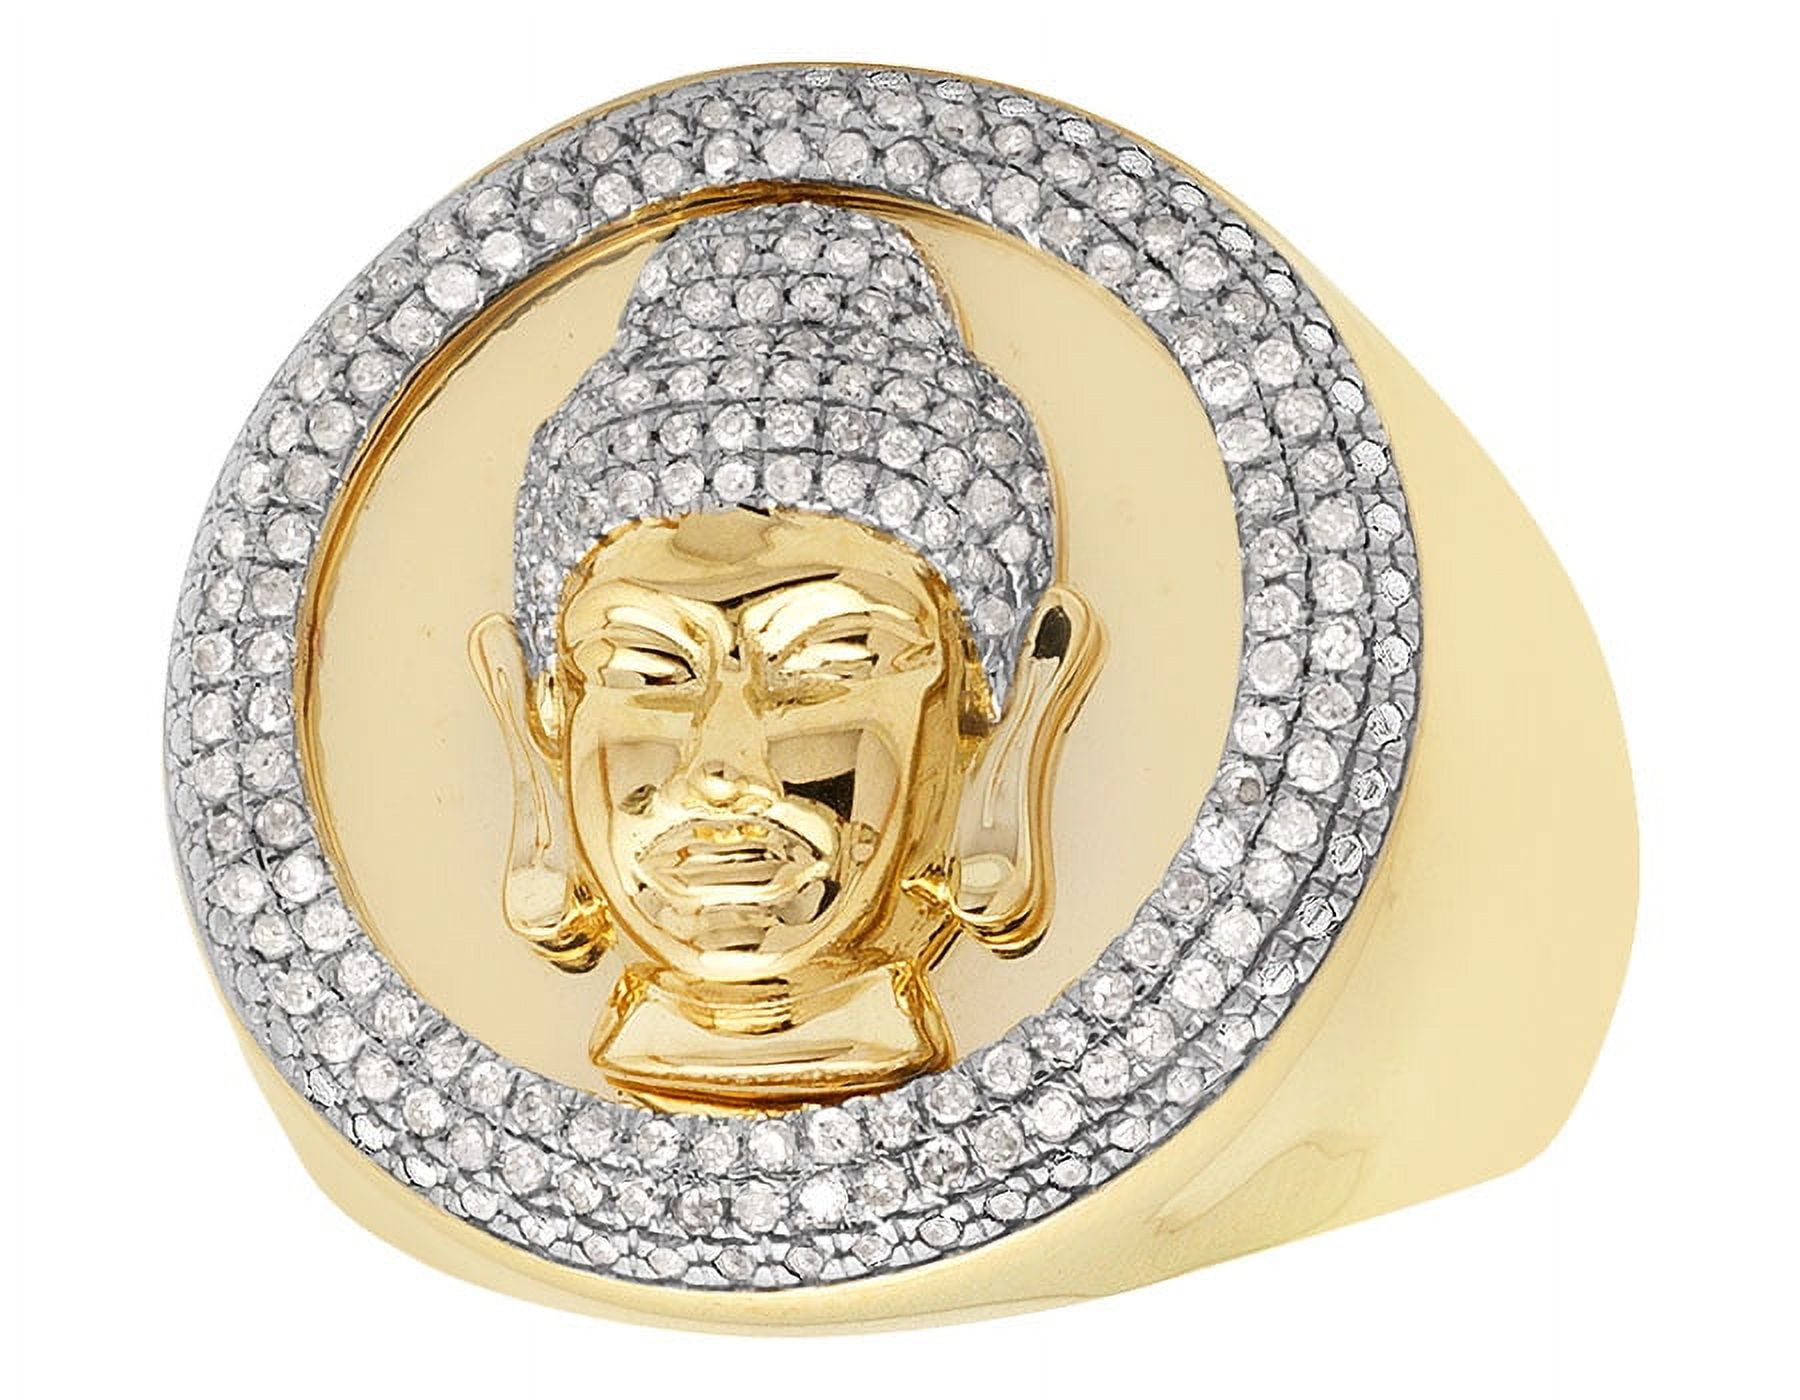 Buy 22K Gold Temple Lord Saibaba Ring 569VA4 Online from Vaibhav Jewellers